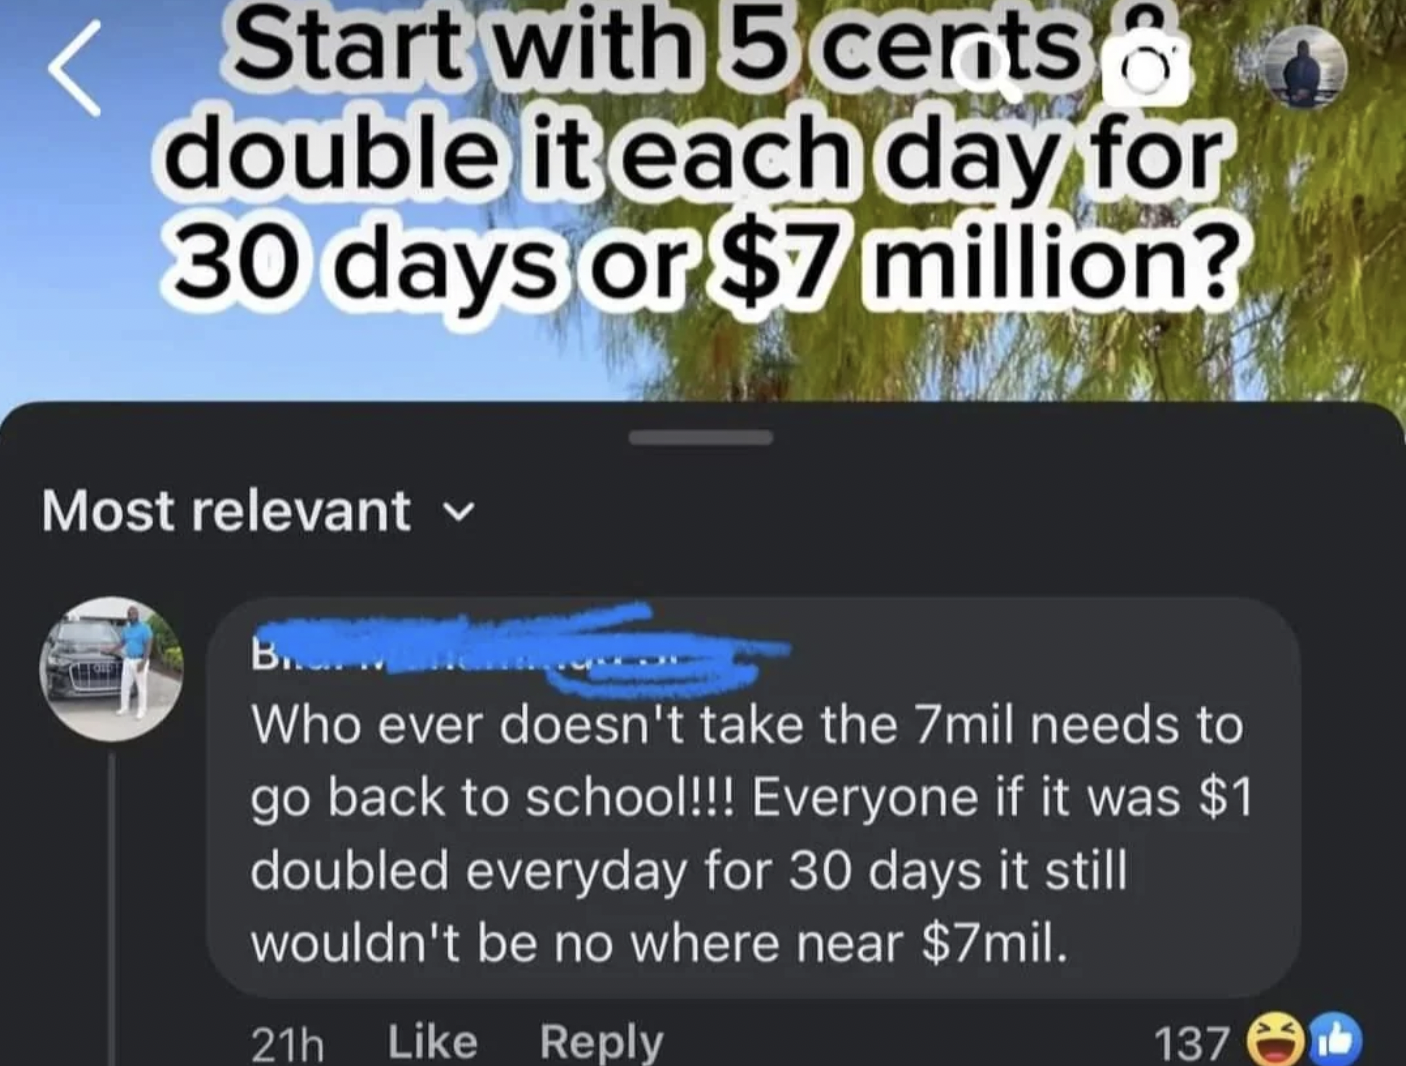 software - Start with 5 cents double it each day for 30 days or $7 million? Most relevant B.... Who ever doesn't take the 7mil needs to go back to school!!! Everyone if it was $1 doubled everyday for 30 days it still wouldn't be no where near $7mil. 21h 1